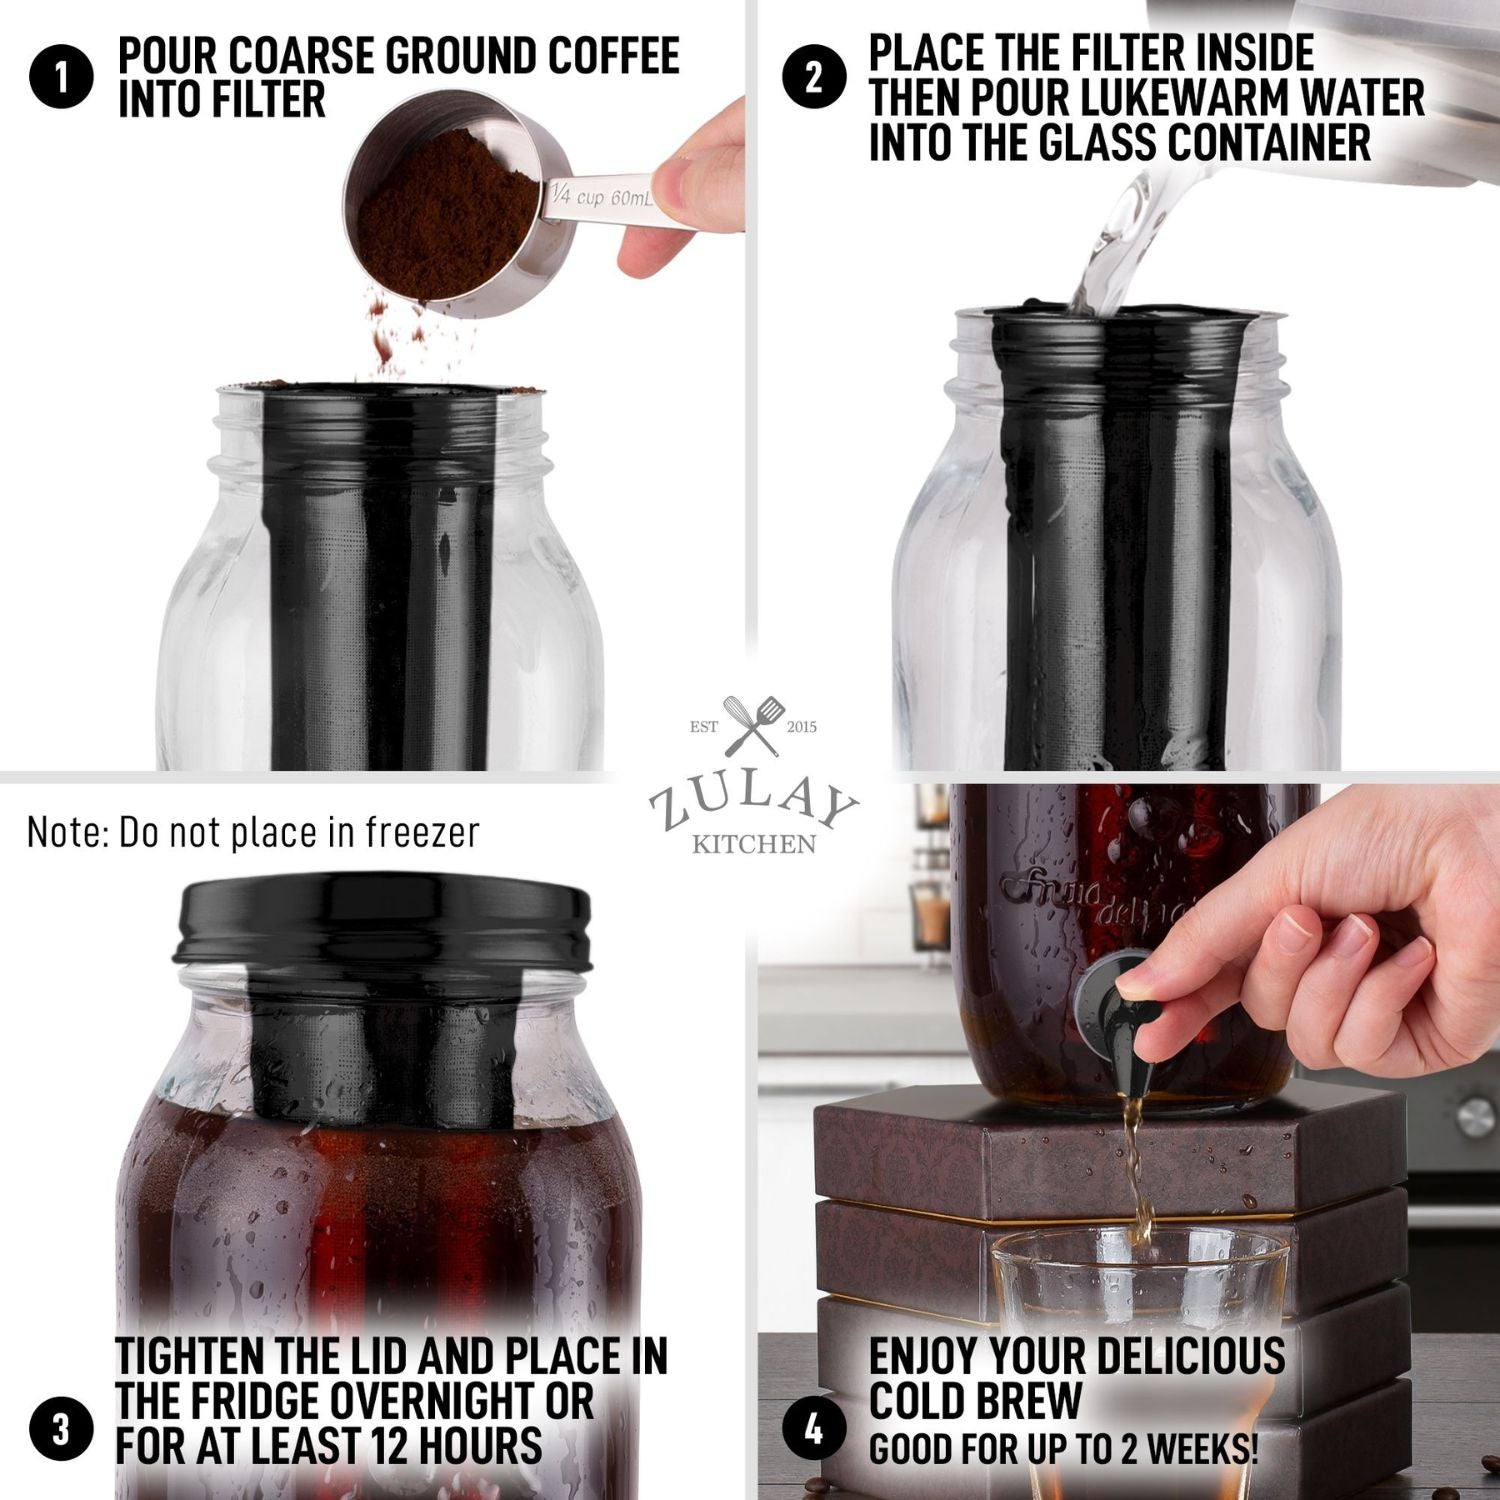 How to make cold brew